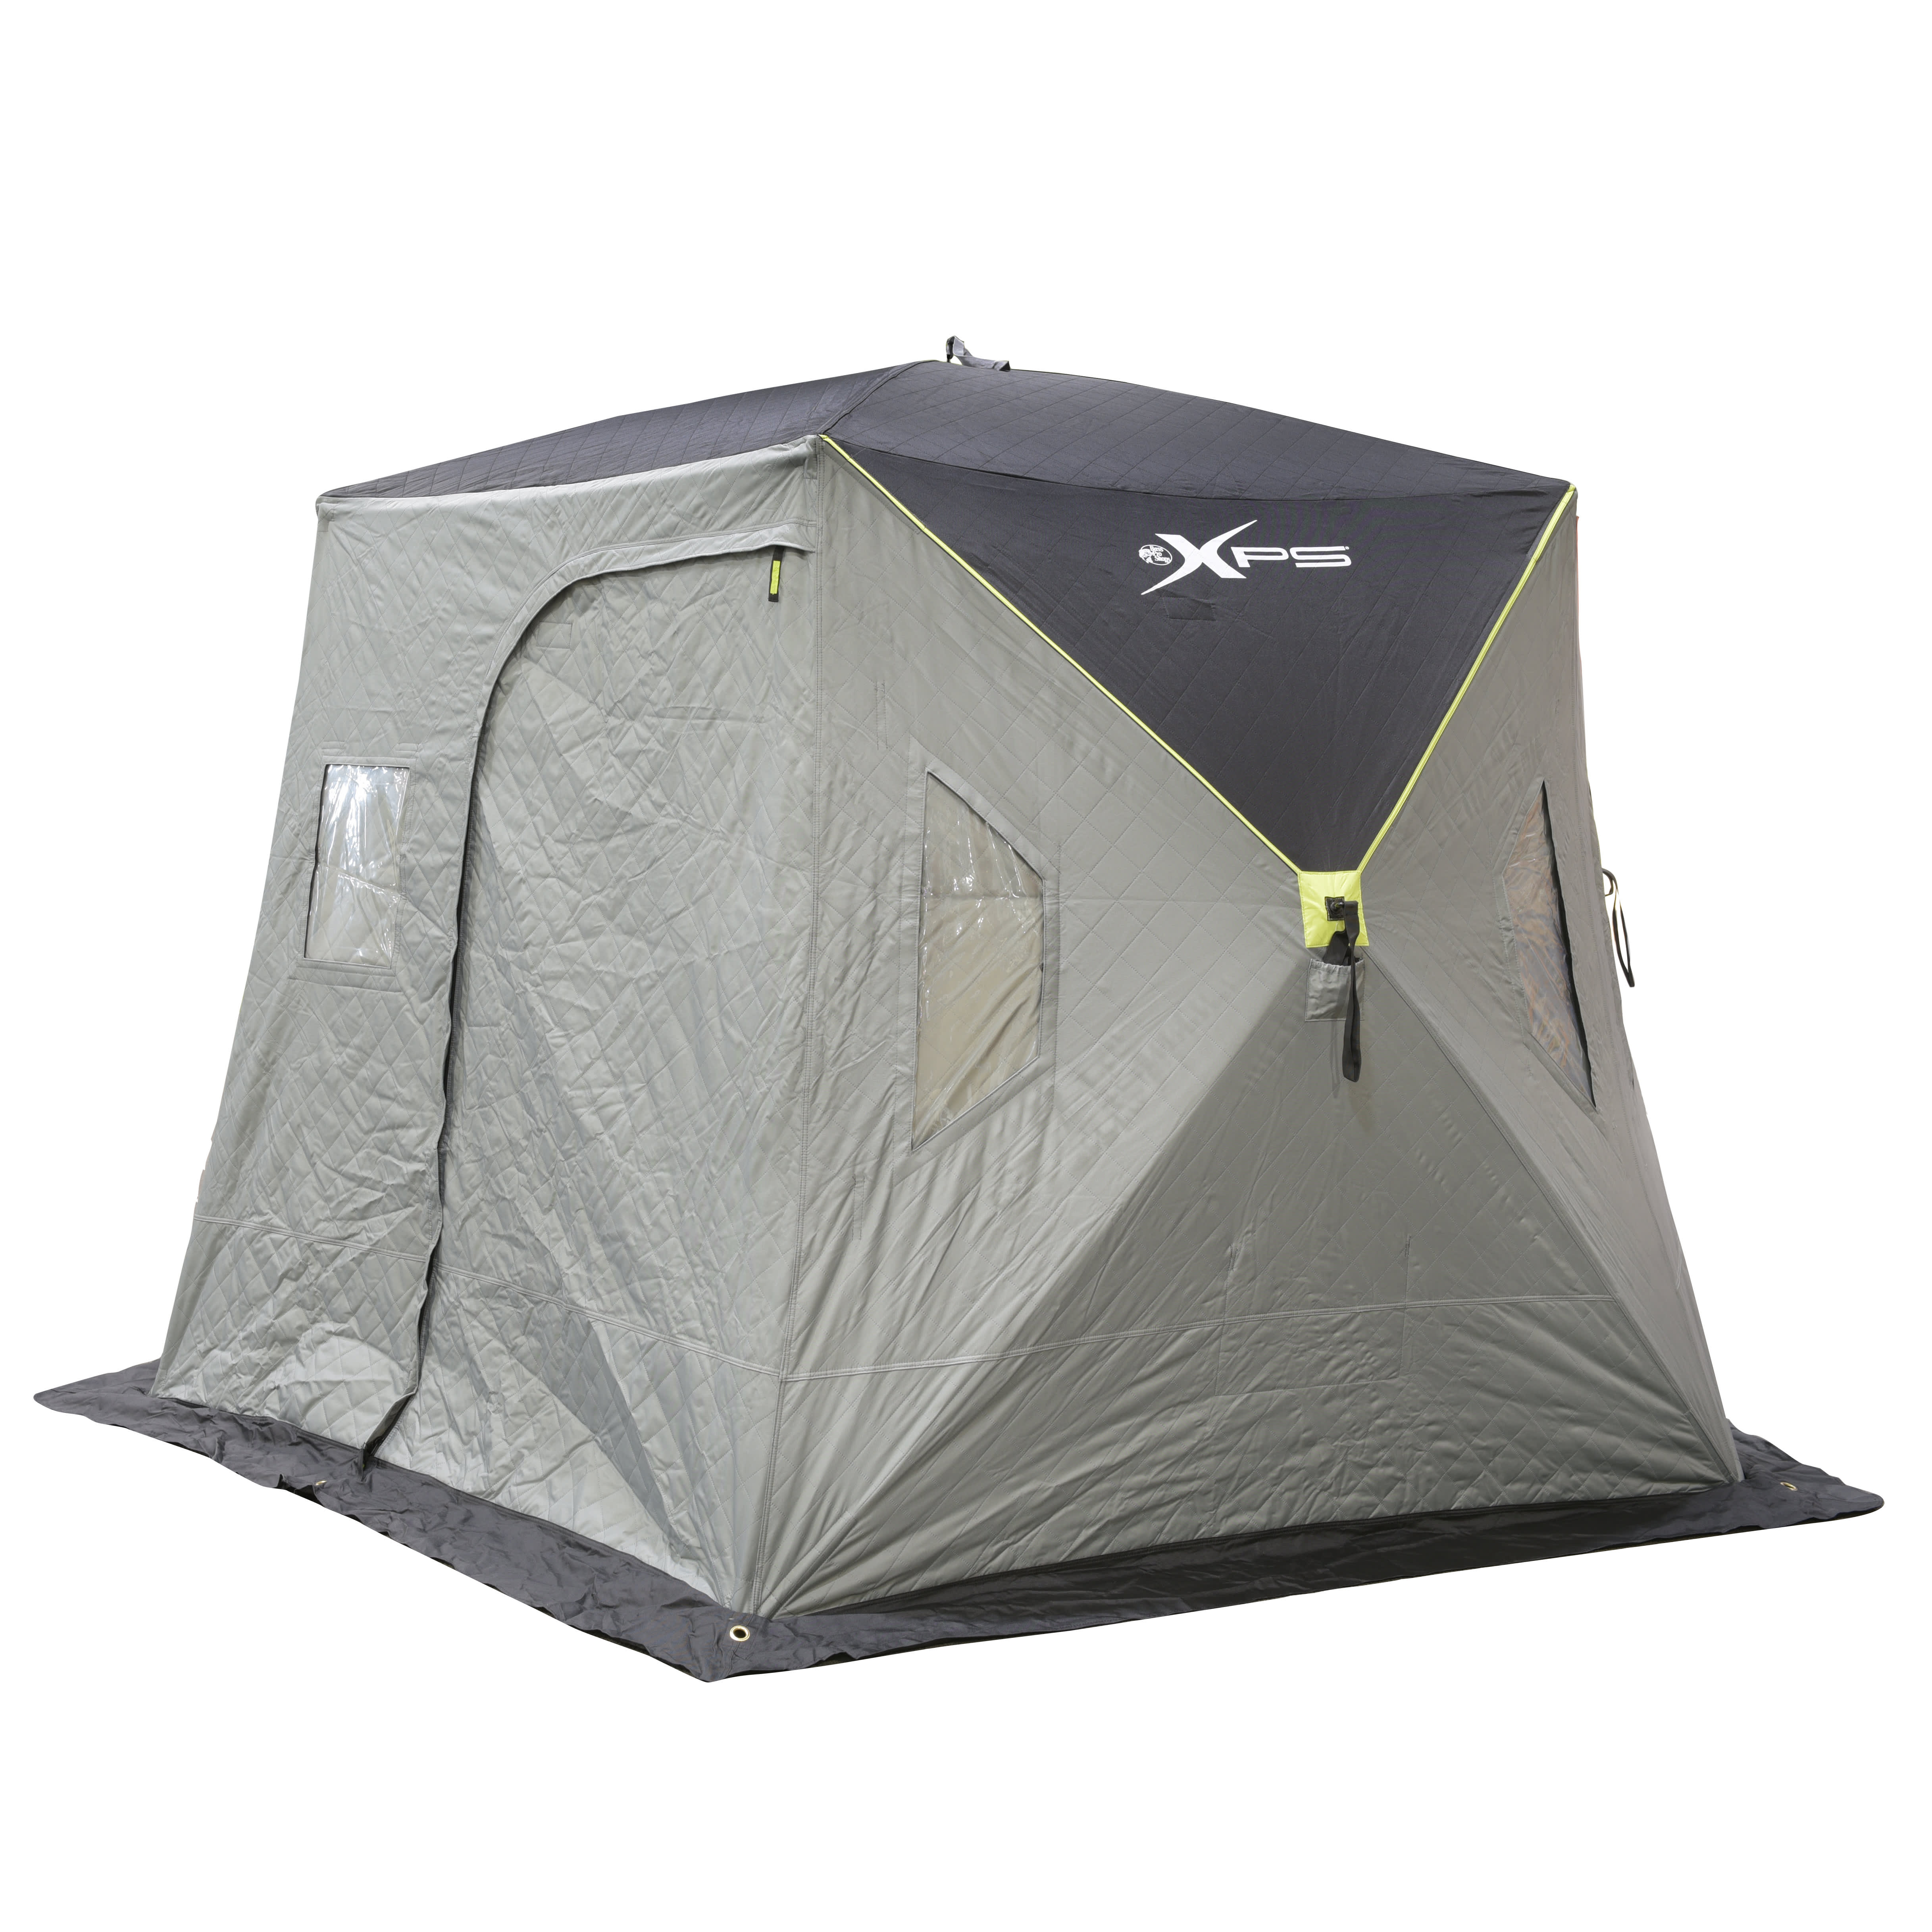 Otter Vortex Pro Monster Lodge Thermal Hub – Wind Rose North Ltd. Outfitters